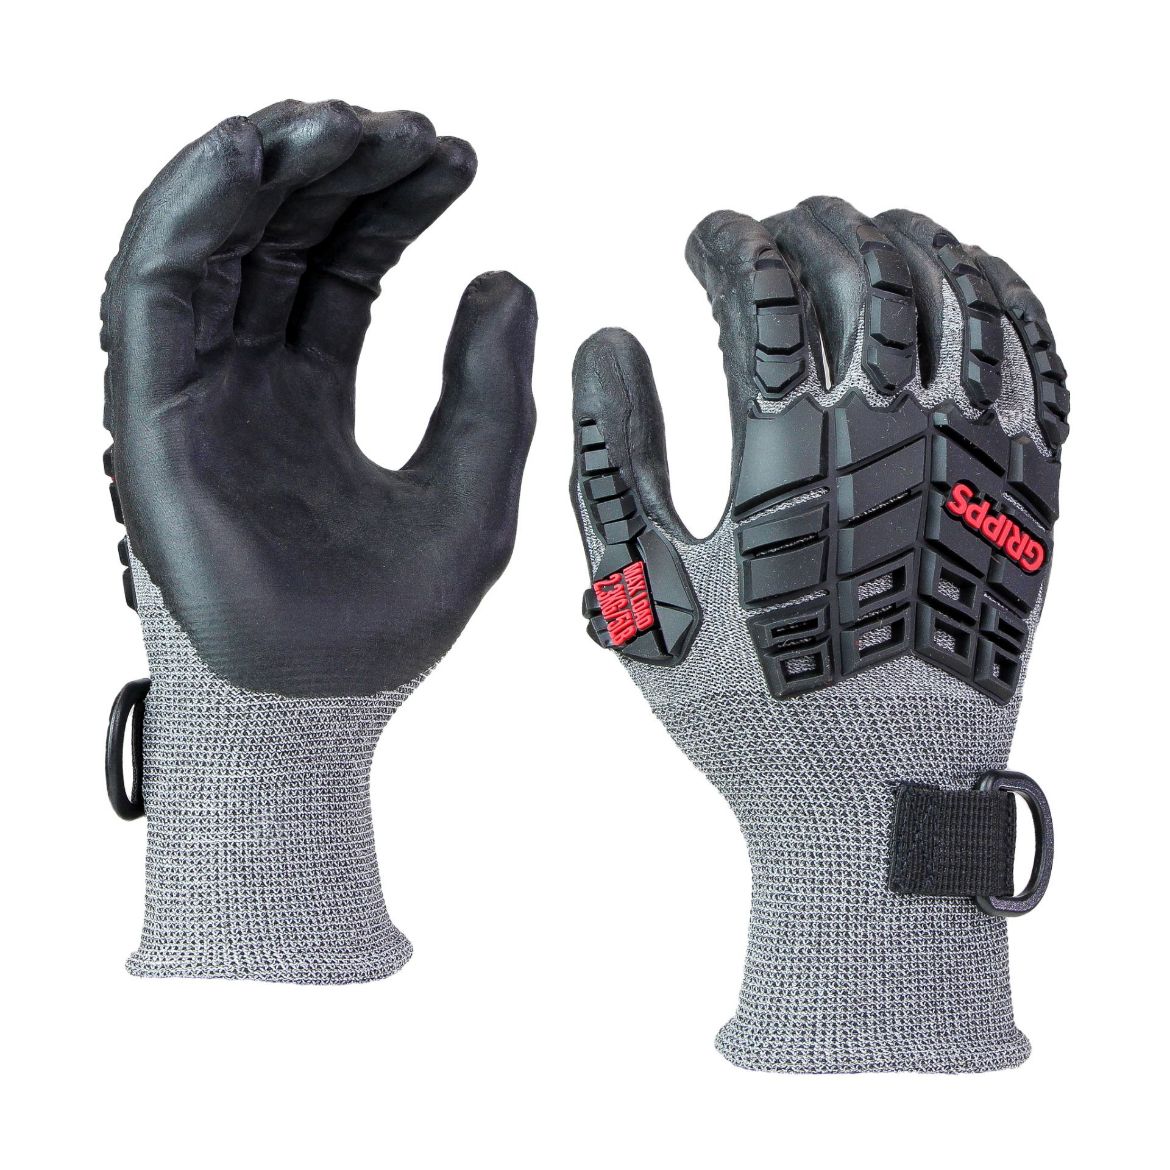 Picture of C5 FLEXILITE IMPACT MKII GLOVES. AVAILABLE IN SIZES - S, M, L, XL, 2XL